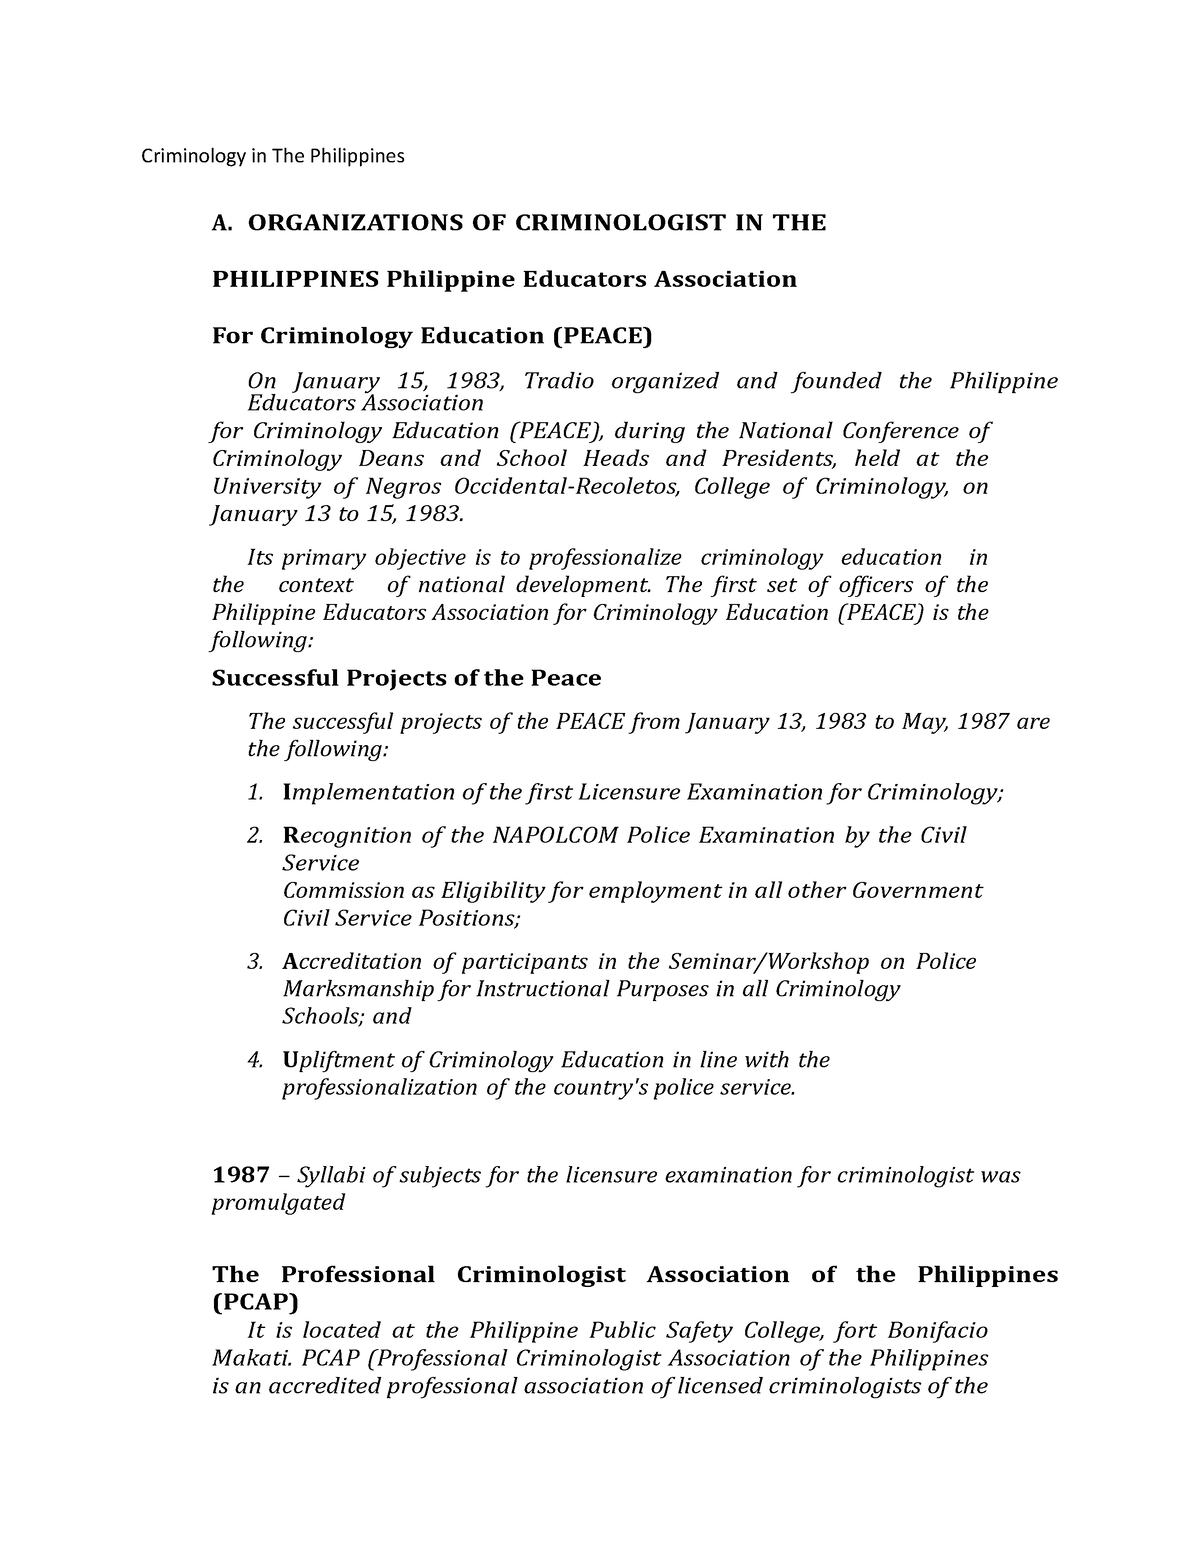 thesis title for criminology students in the philippines